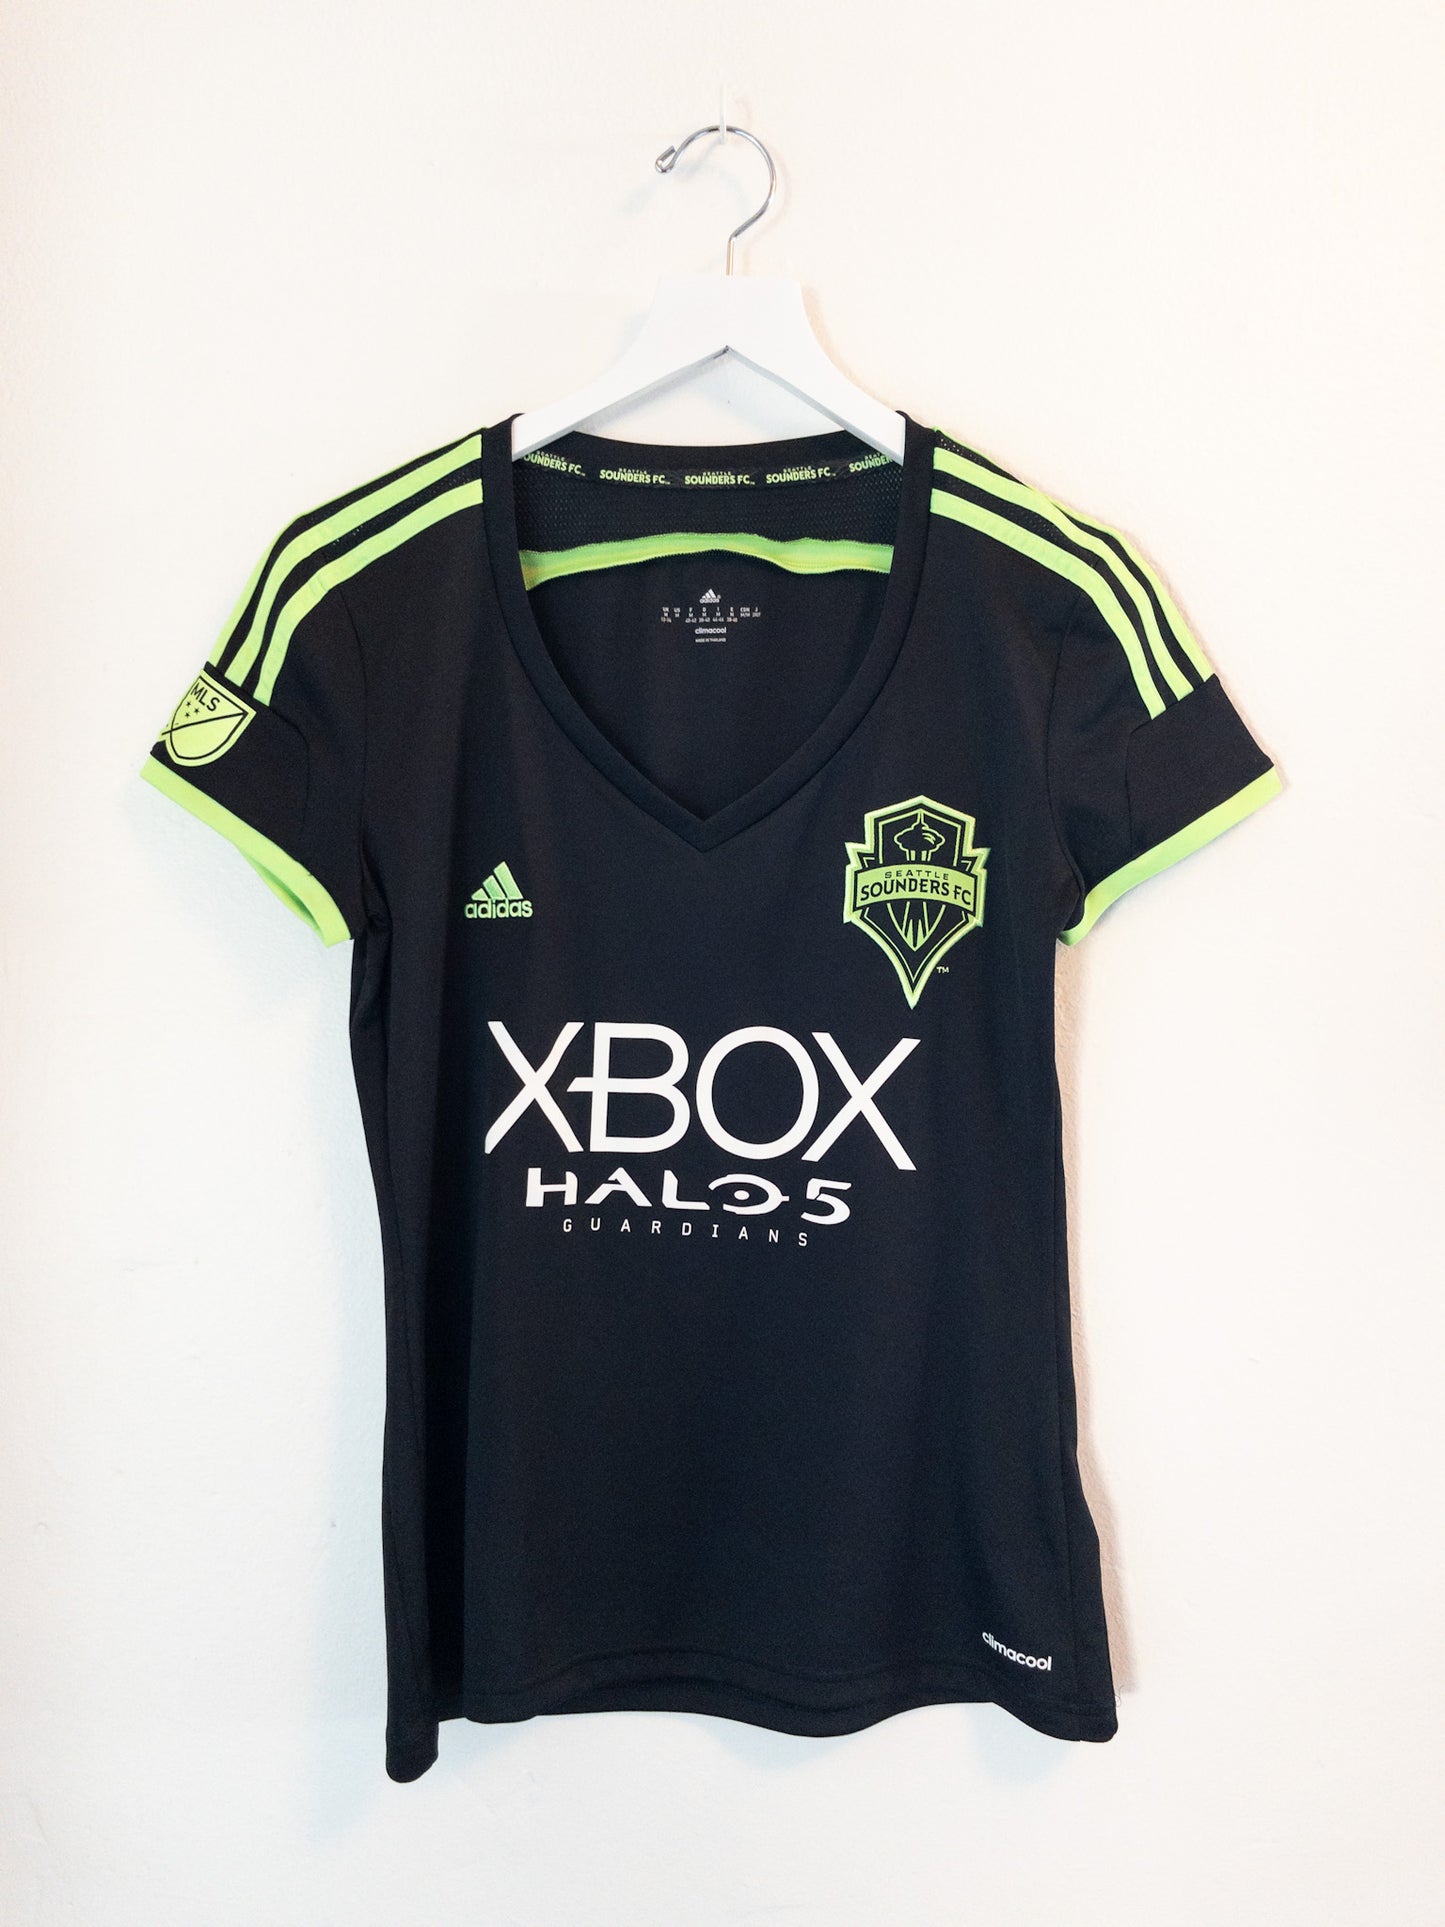 2015 Sounders Halo 5 Guardians Third Kit